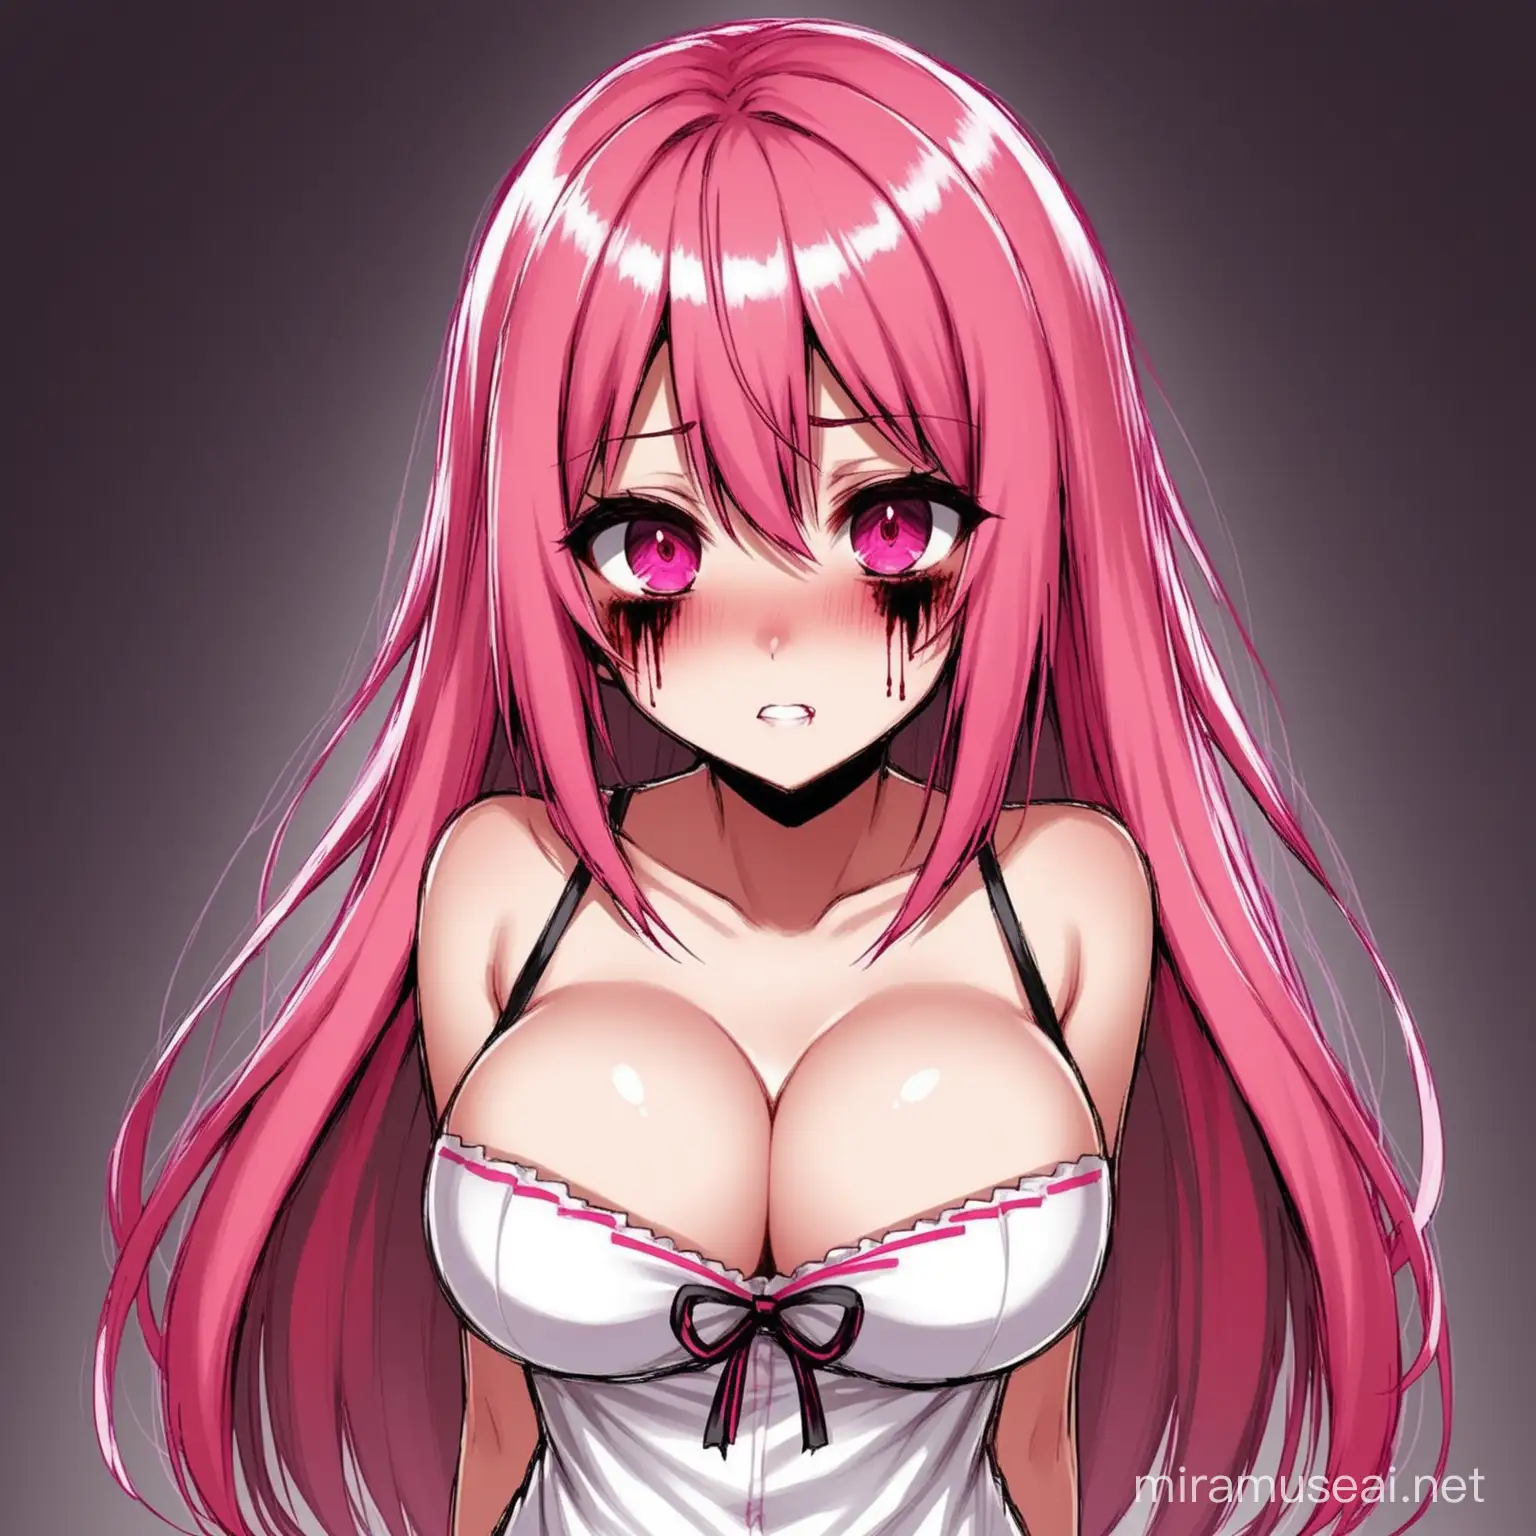 yandere, pink haired, big titty girl, Heartless. pink eyes

